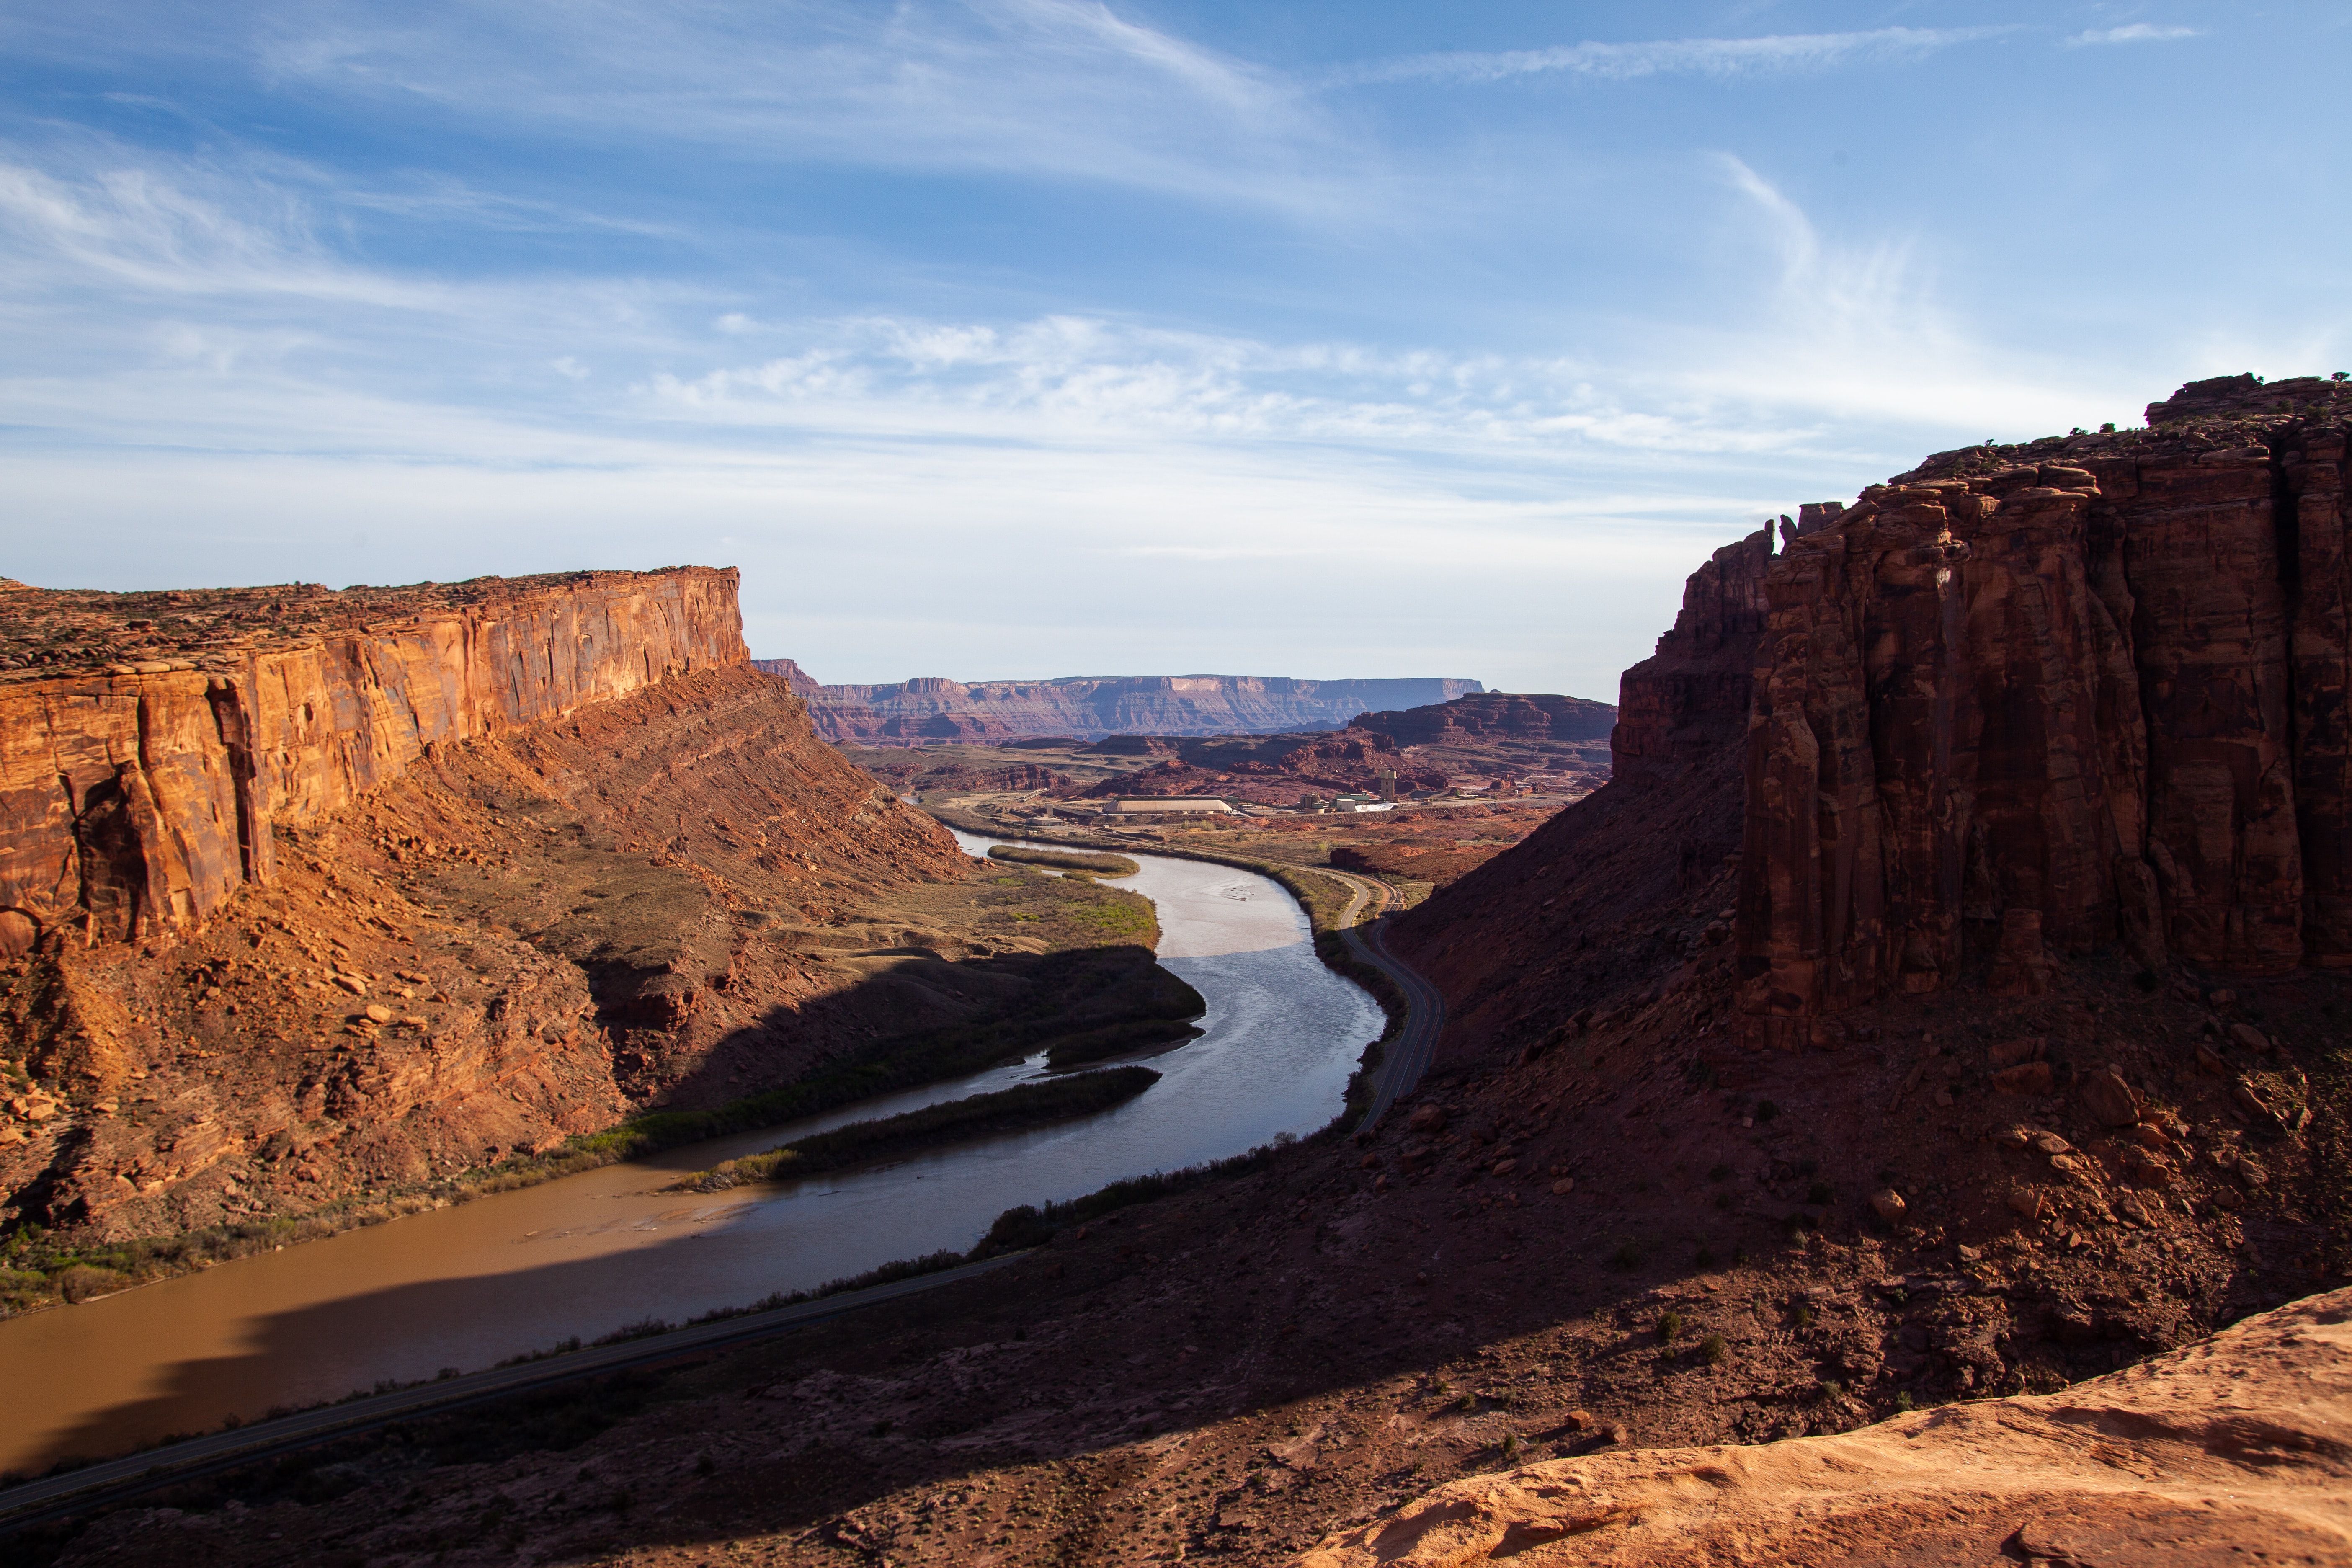 A view of the Colorado River in Moab, Utah